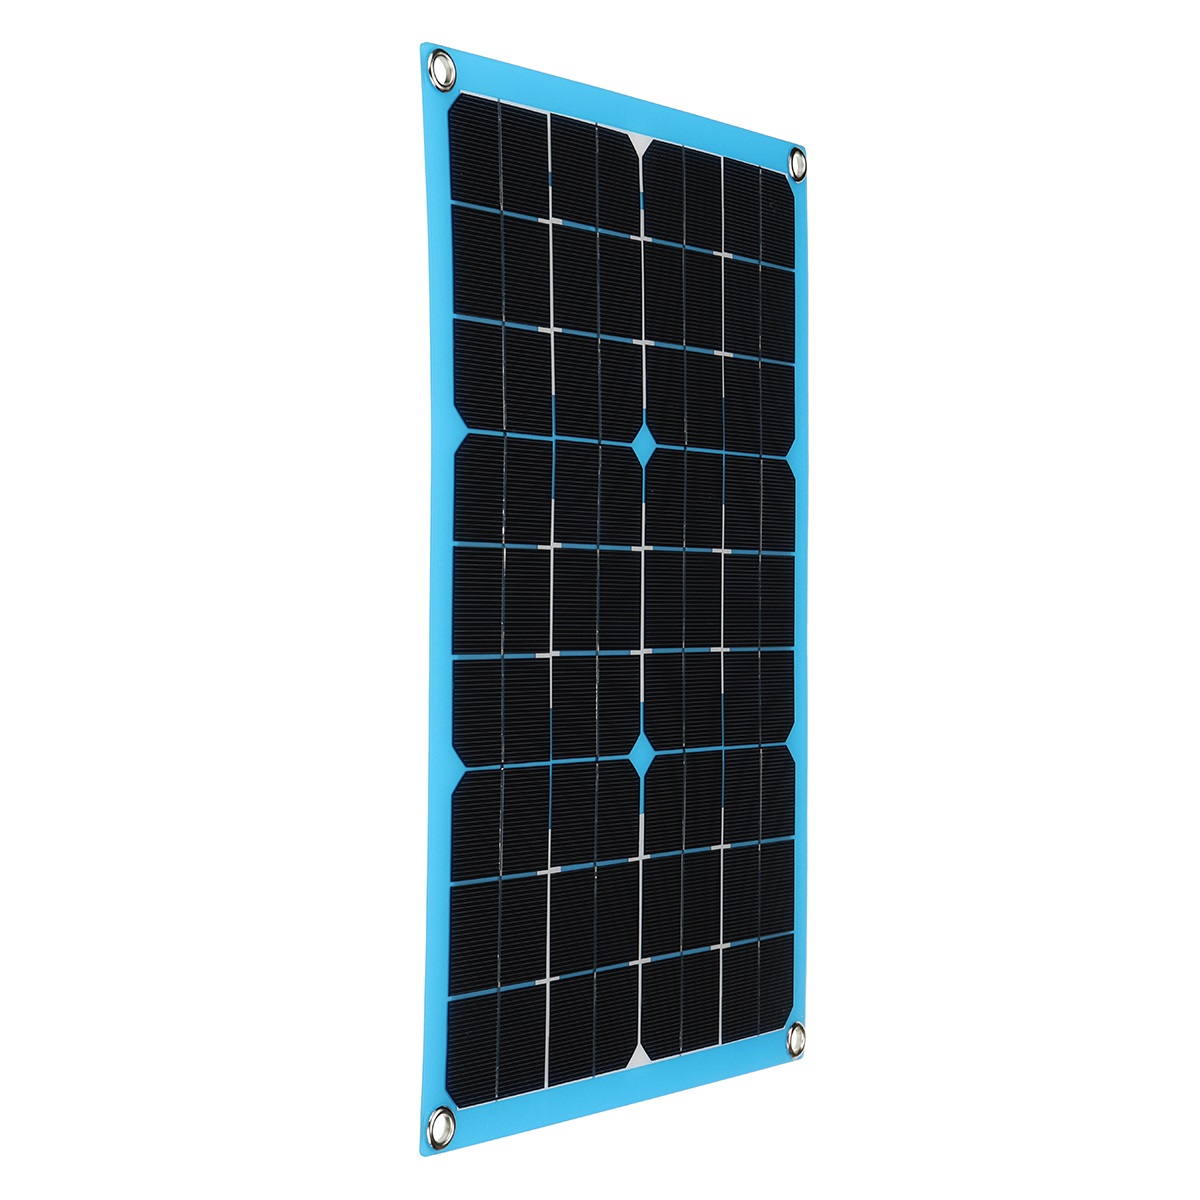 Find Monocrystalline Solar Panel Power Inverter System DC / USB Solar Charger With Controller For Home Car RV Boat Battery Charger for Sale on Gipsybee.com with cryptocurrencies